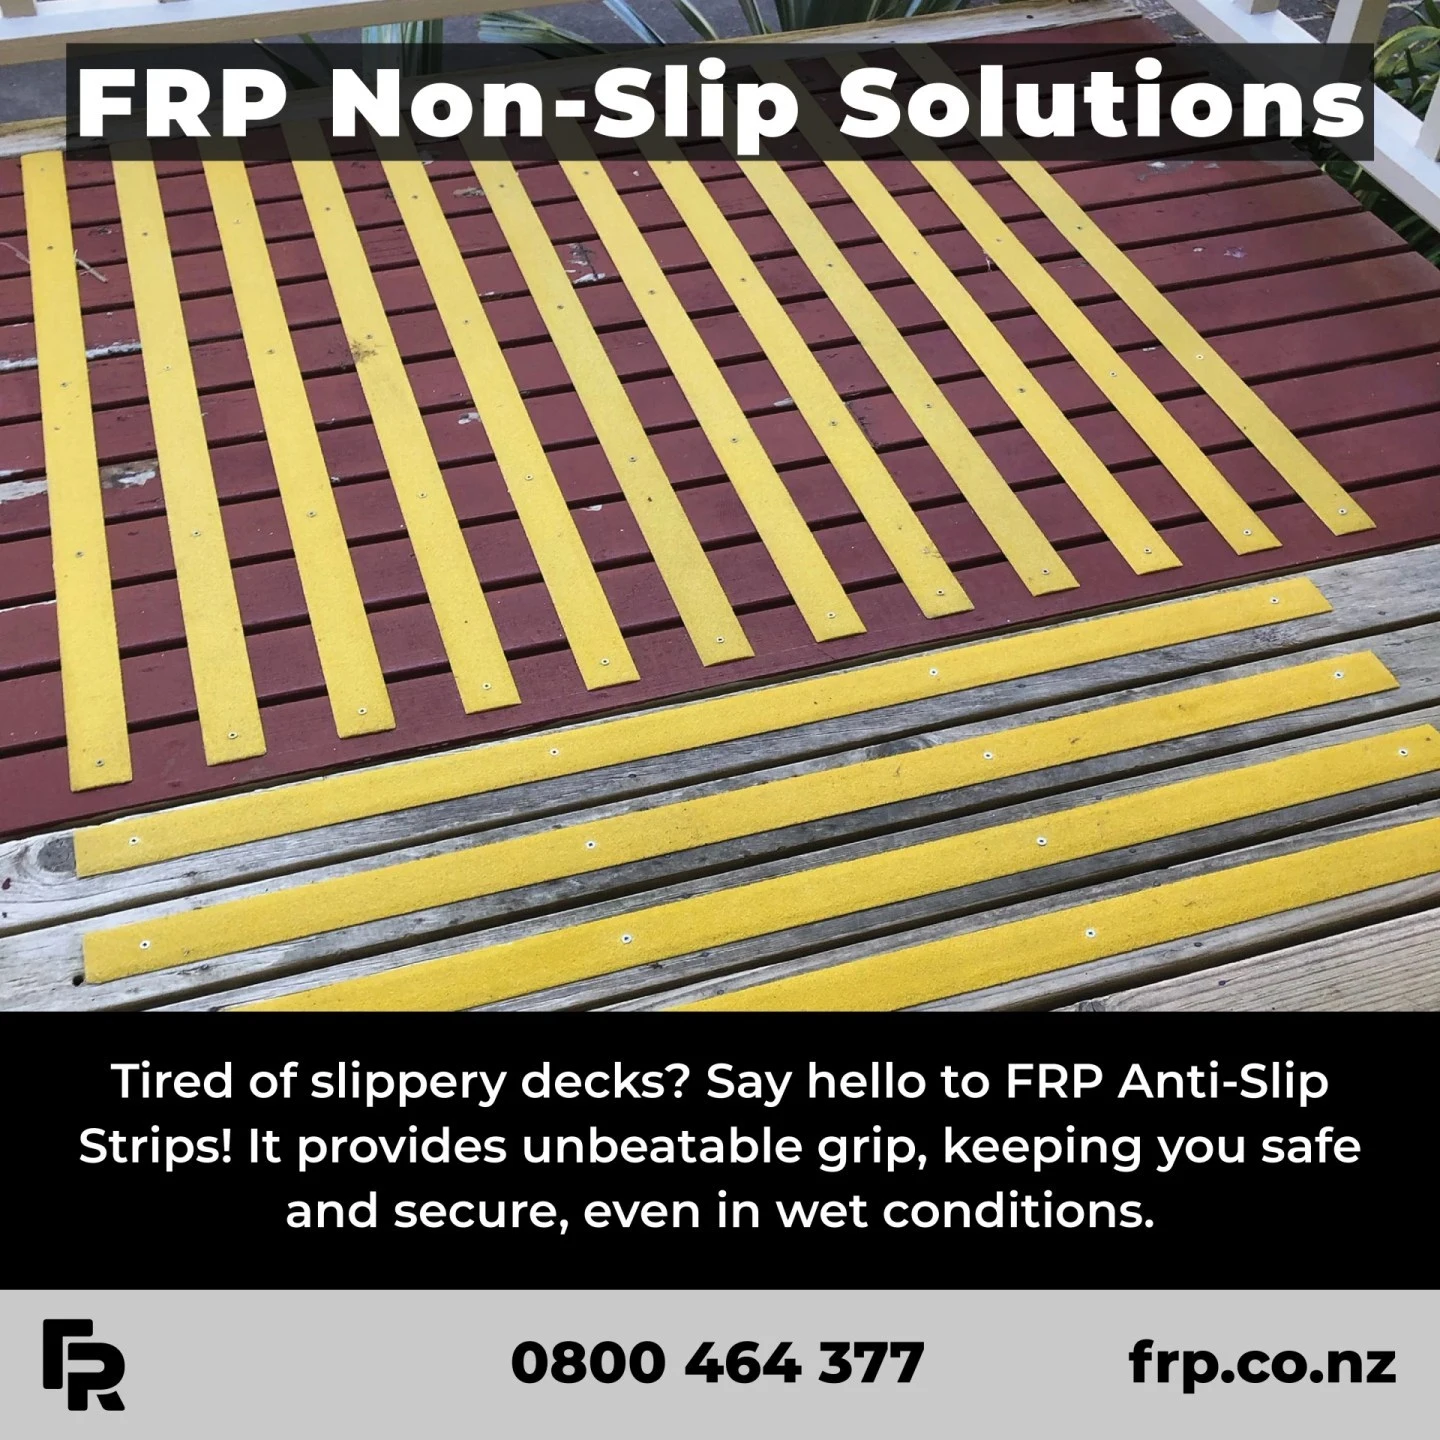 Step confidently into your outdoor space with FRP.

#frp #frpproducts #antislip #nonslip #decking #landscaping #commercial #nzconstruction #nzarchitects #